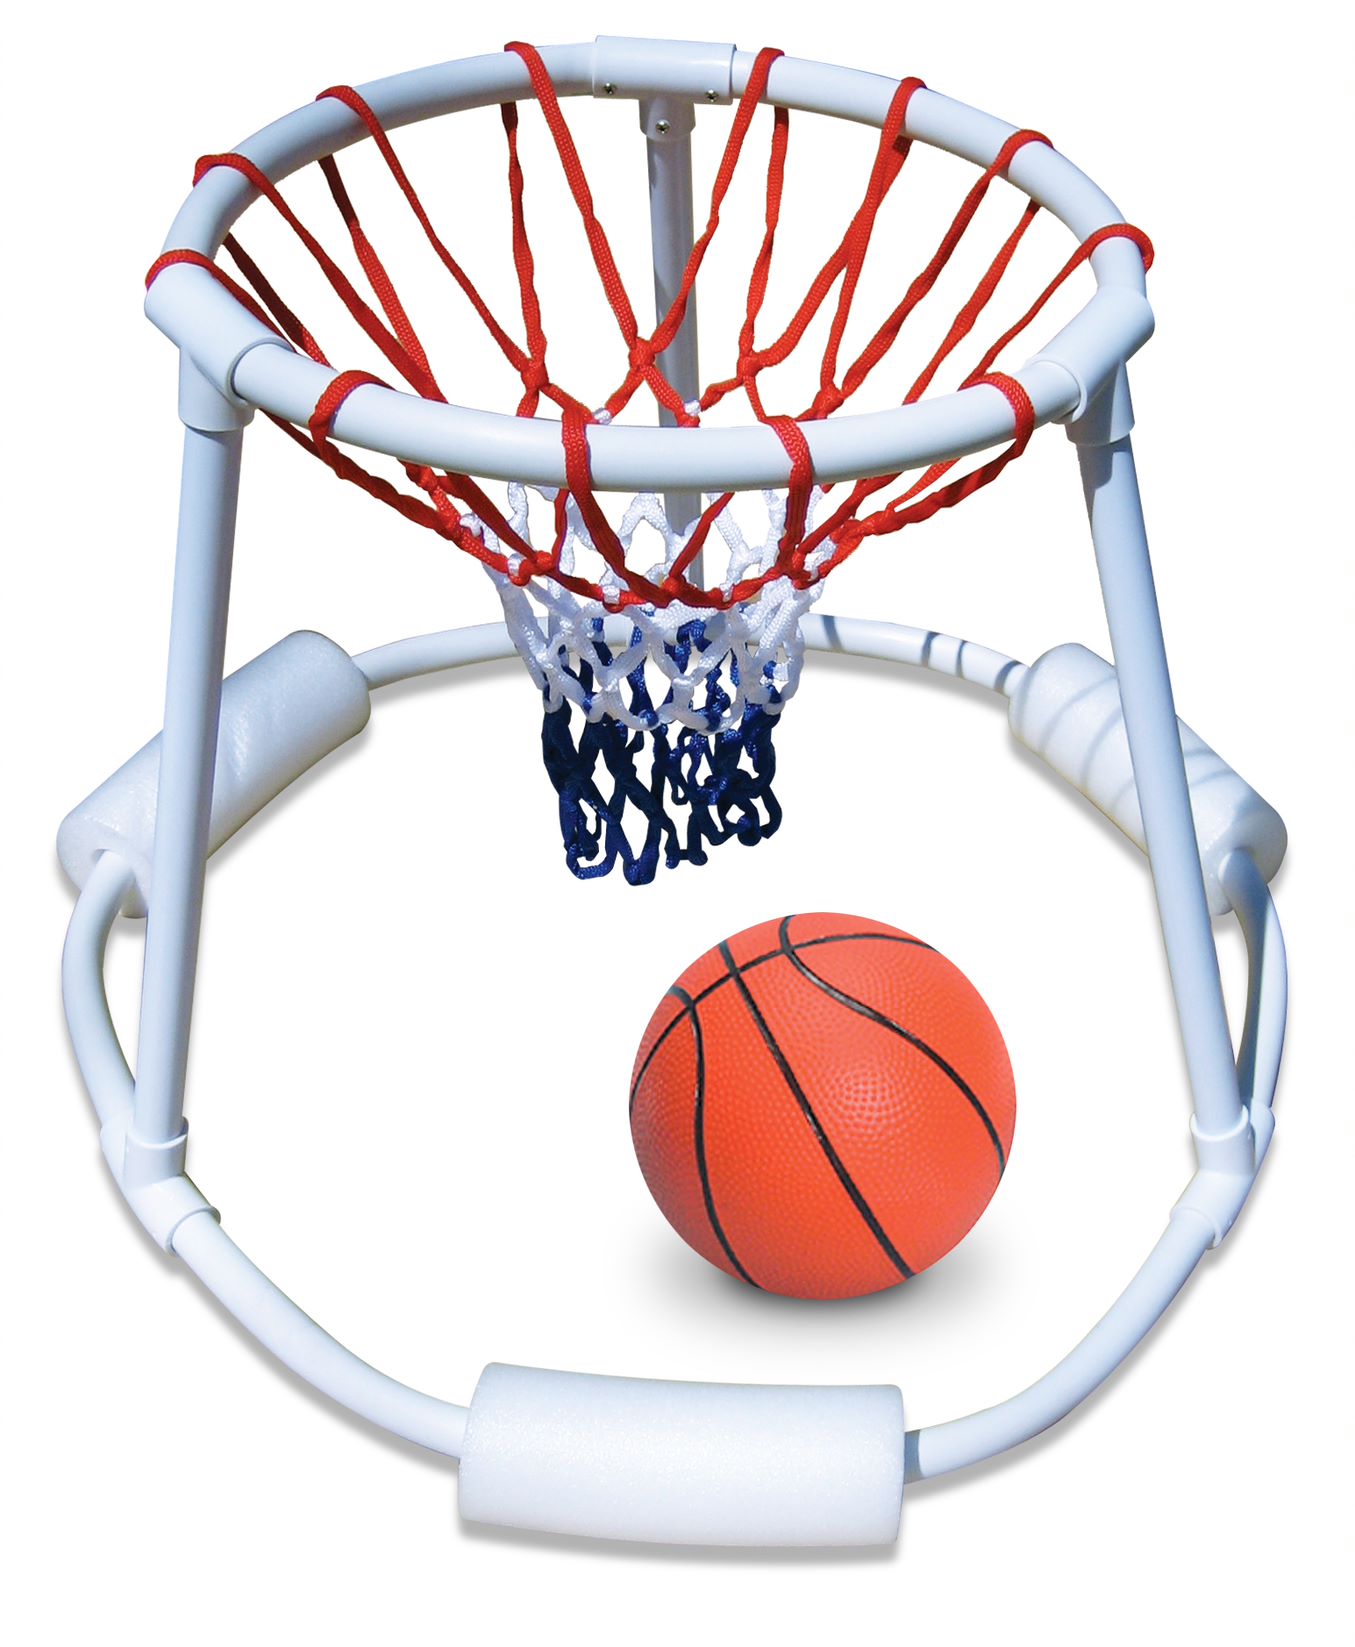 9162 Super Hoops Bsktball Game - CLEARANCE SAFETY COVERS